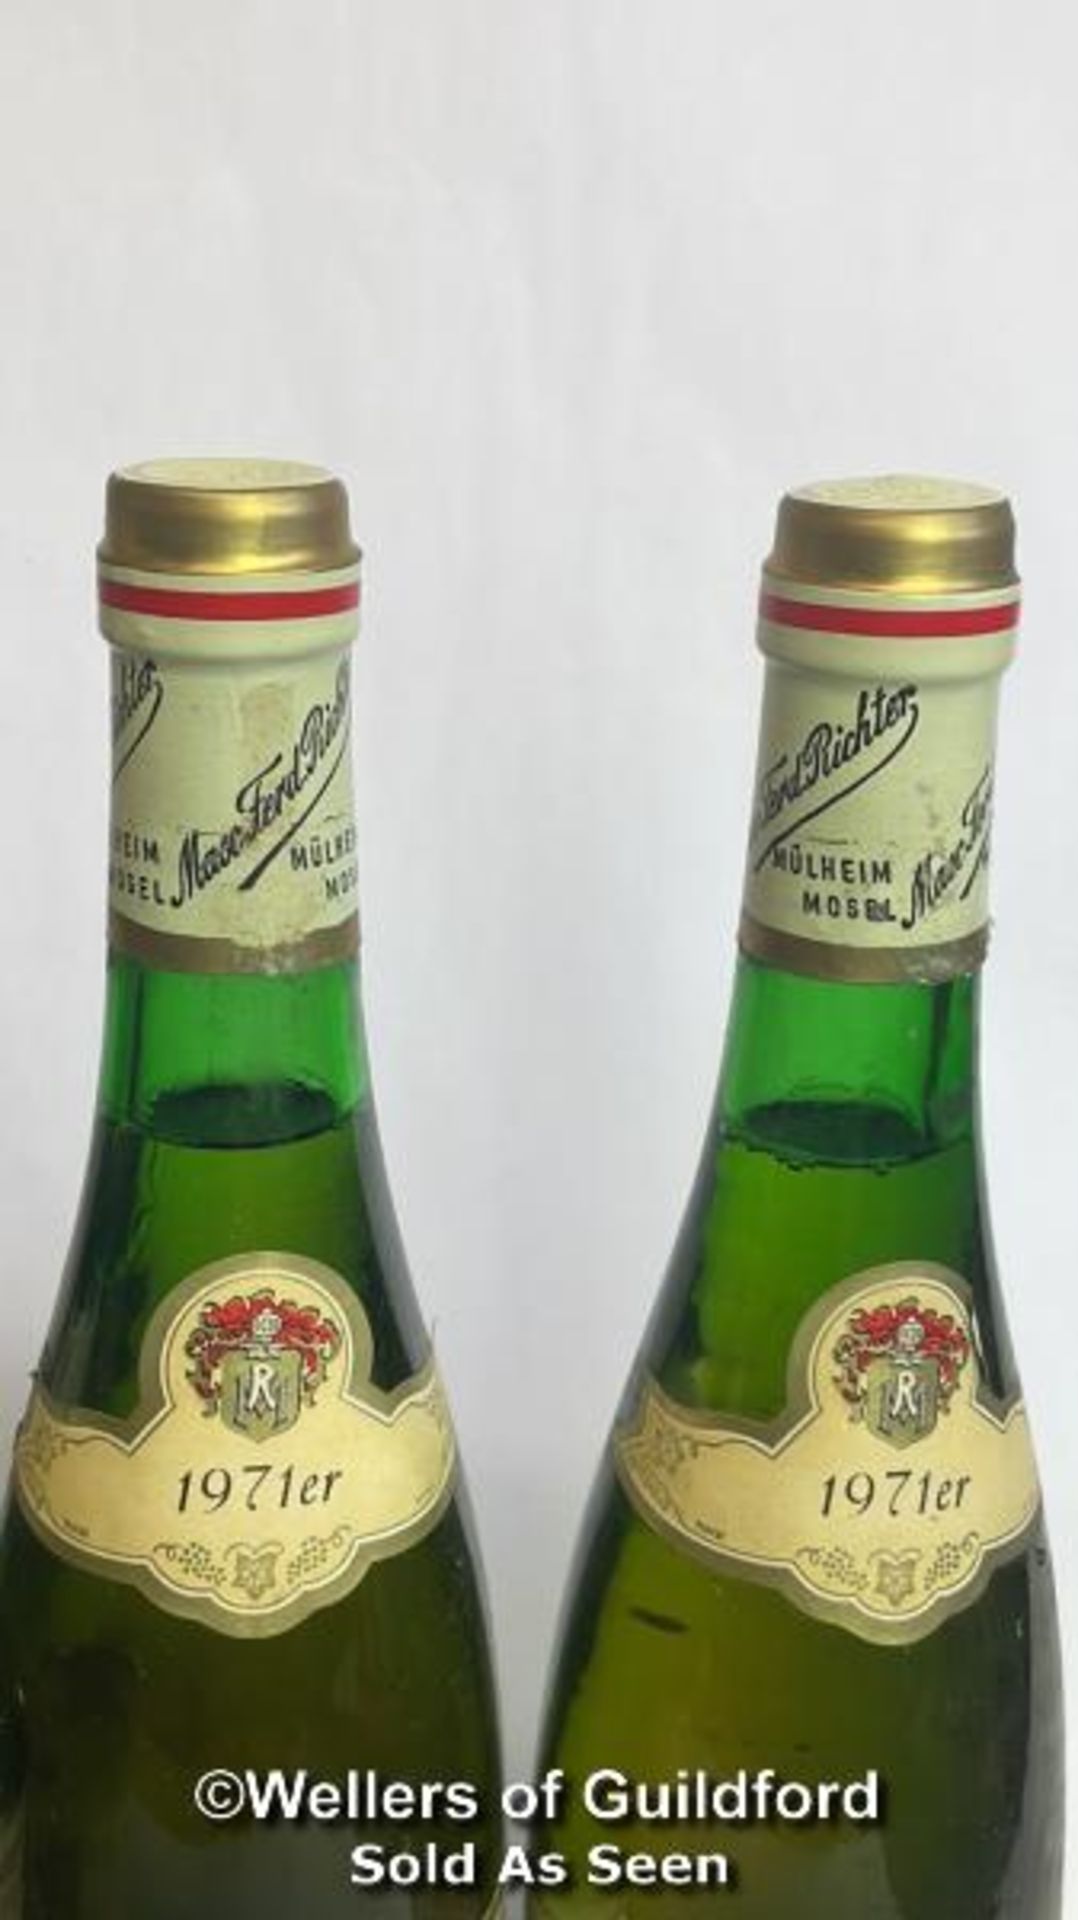 Nine bottles of Max Ferd. Richter Mulheimer Helenenkloster Riesling Auslese, Six 1971 and Three 1973 - Image 7 of 11